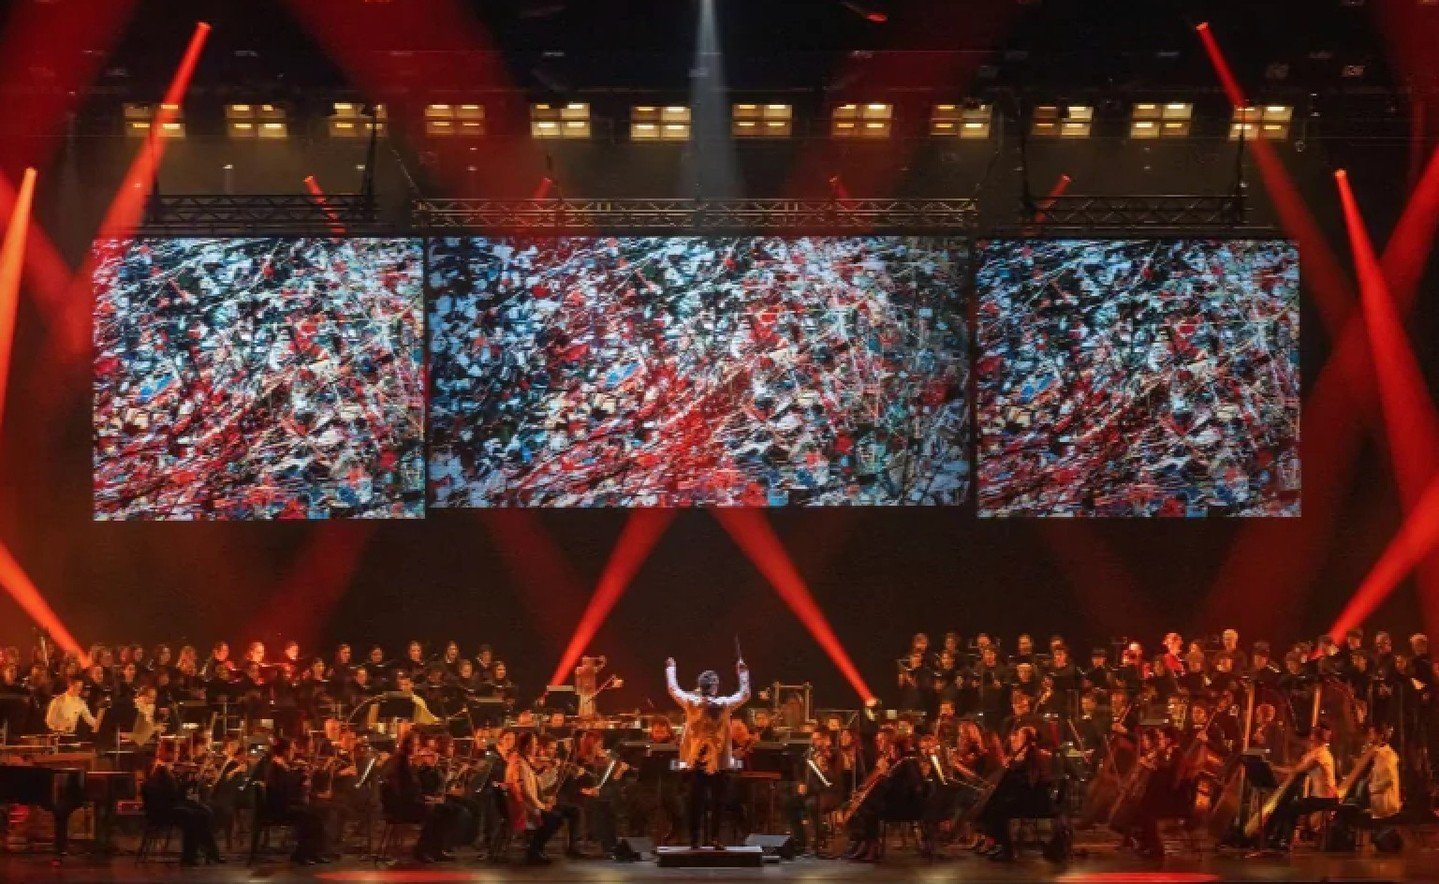 Music review: Vancouver Symphony Orchestra and Vancouver Bach Choir deliver plenty of grandeur, but little whimsy, in Riopelle Symphonique.⁠
⁠
The Audain Foundation&rsquo;s presentation of the multimedia tribute to Jean Paul Riopelle offered stunning